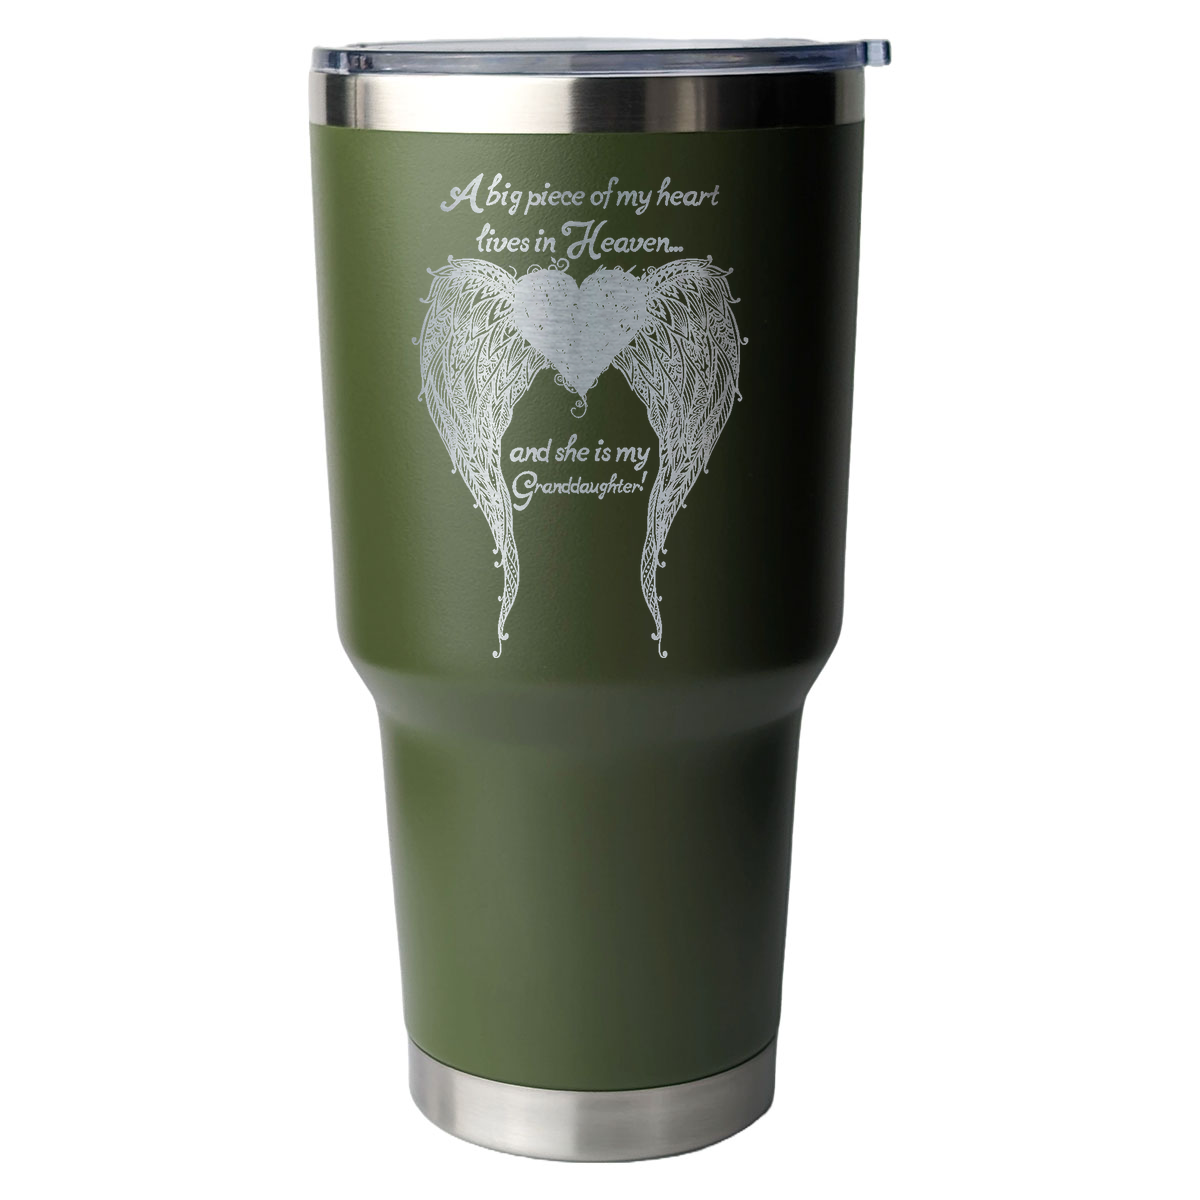 Granddaughter - A Big Piece of my Heart 30 Ounce Laser Etched Tumbler Military Green